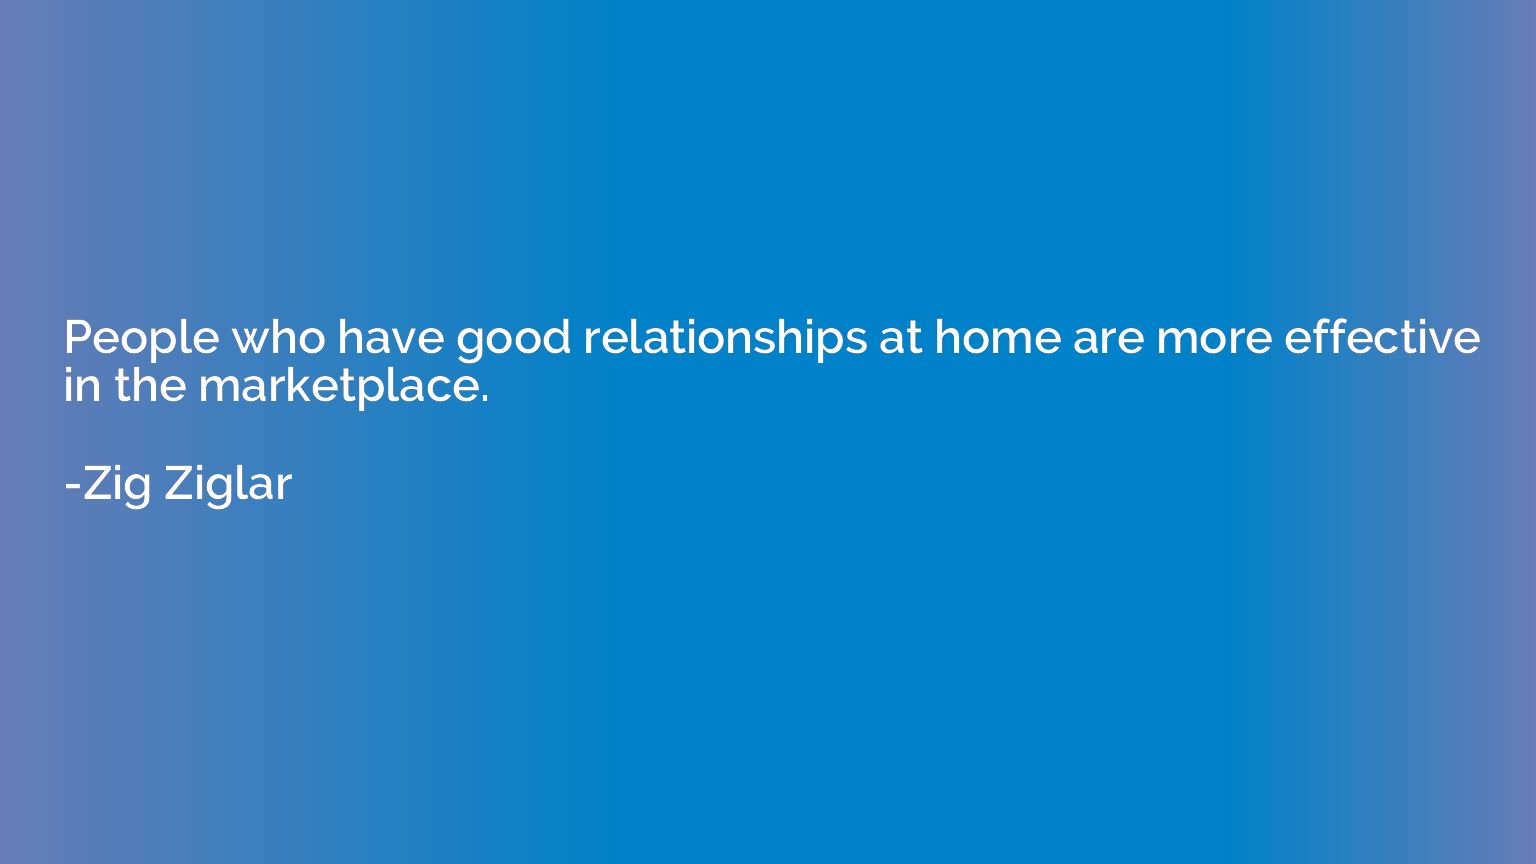 People who have good relationships at home are more effectiv